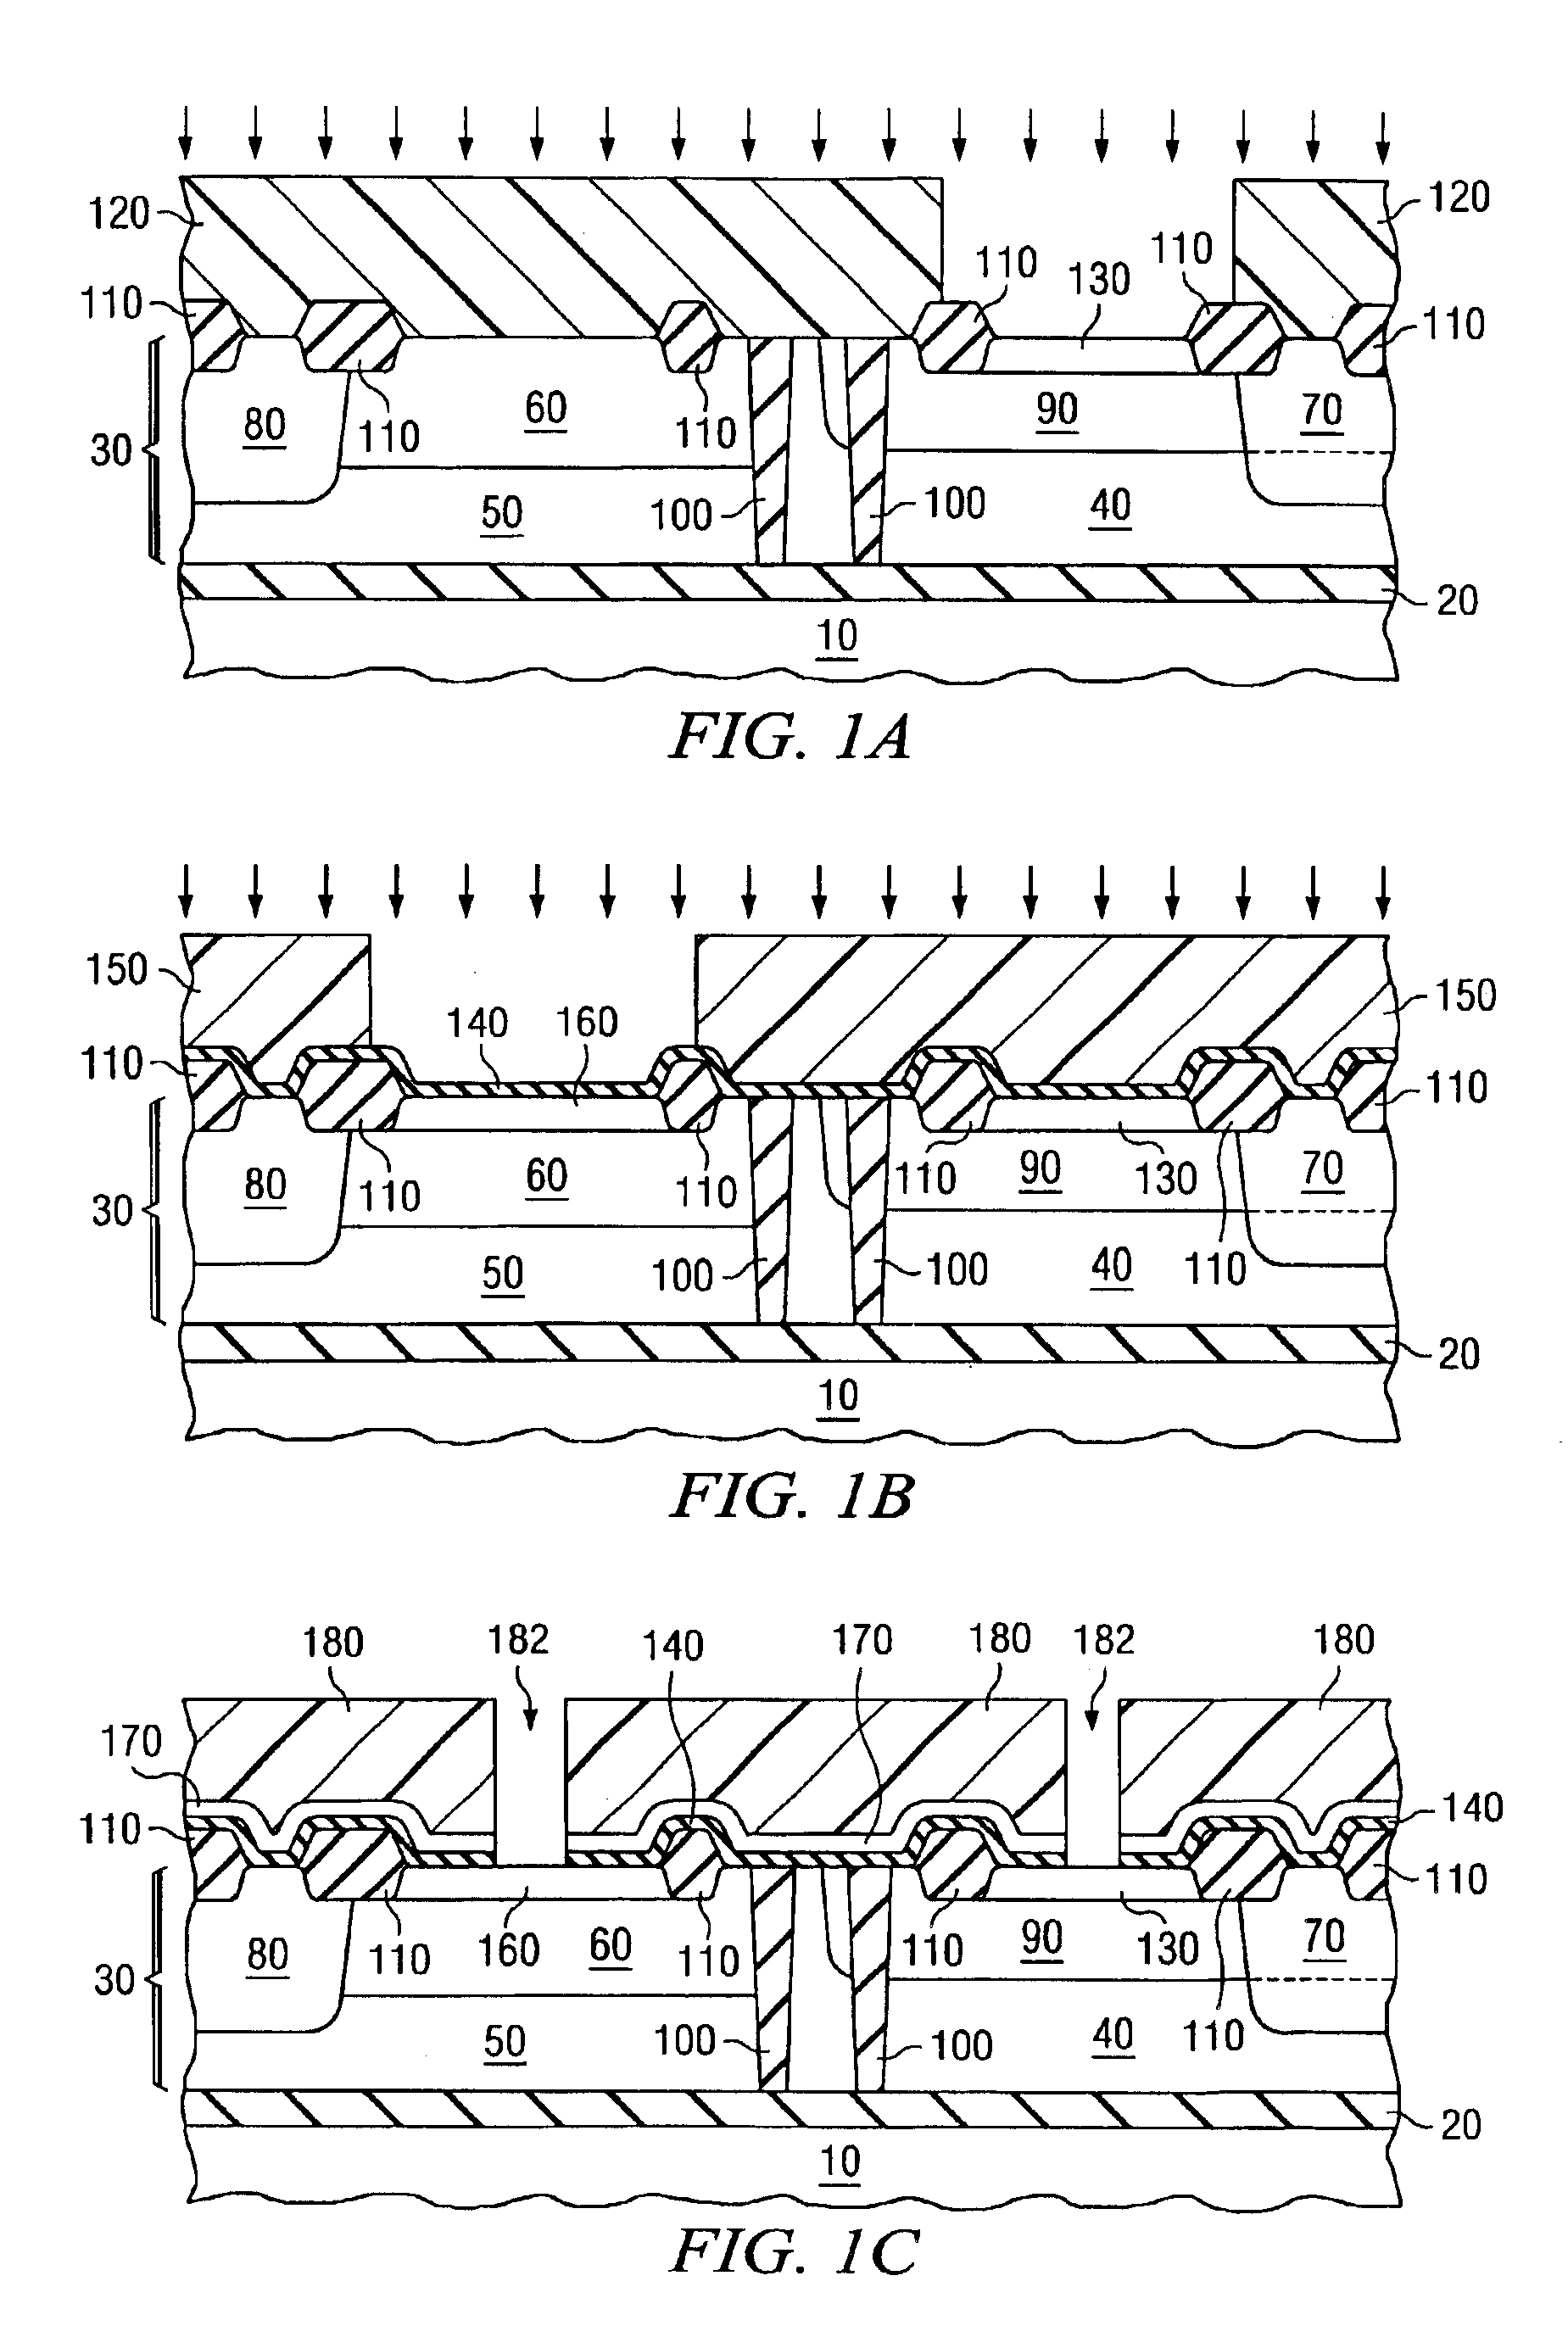 Reduce 1/f noise in NPN transistors without degrading the properties of PNP transistors in integrated circuit technologies